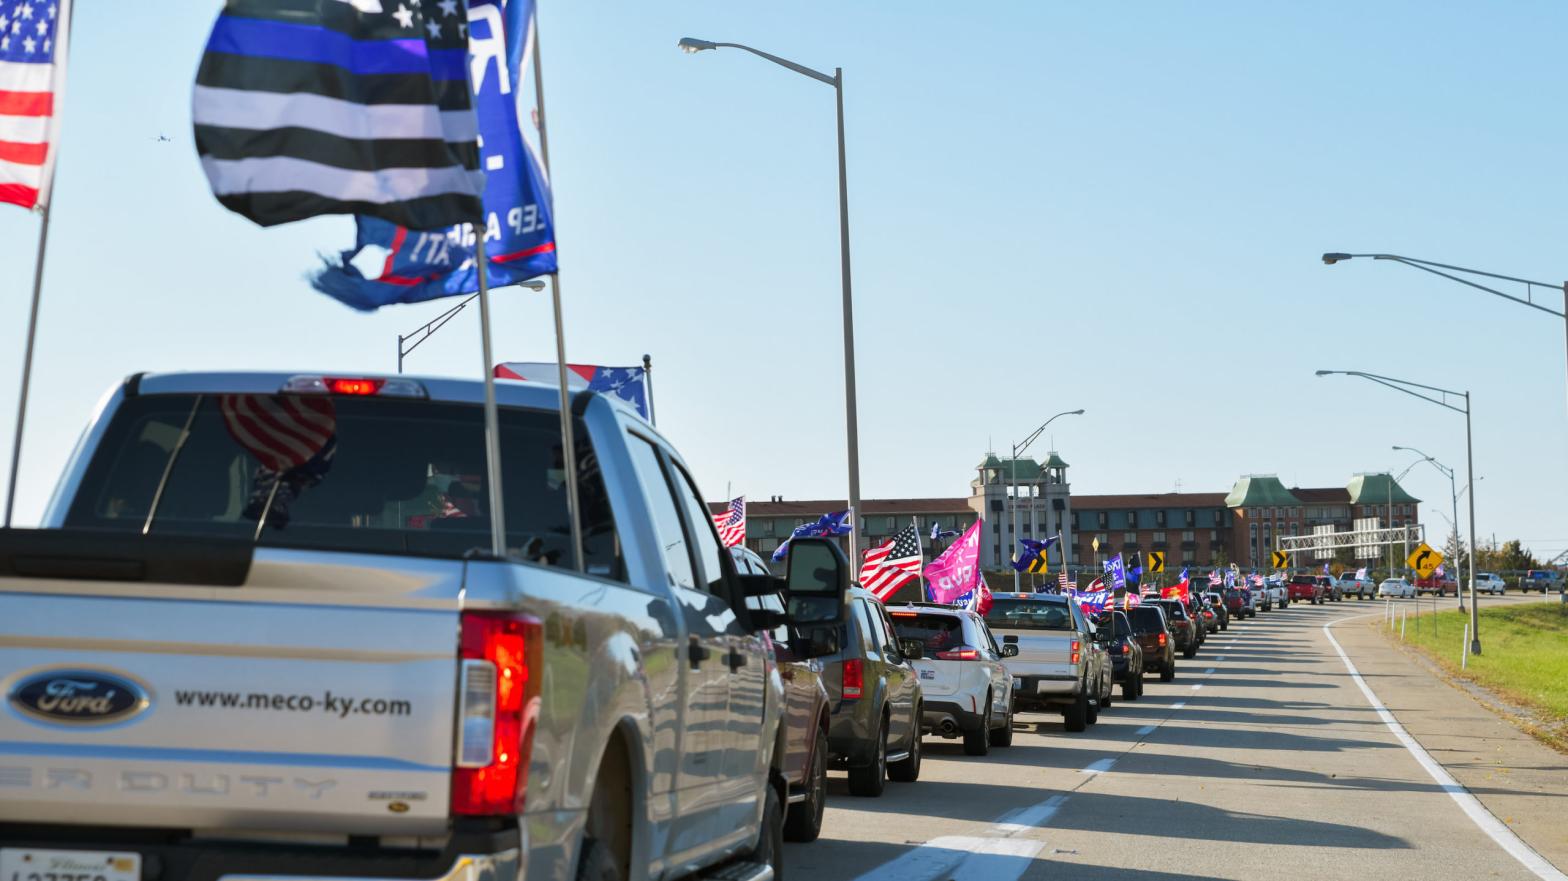 Vehicles participating in the Trump Train caravan on wait in interstate traffic on Nov. 1, 2020. (Photo: Jon Cherry, Getty Images)